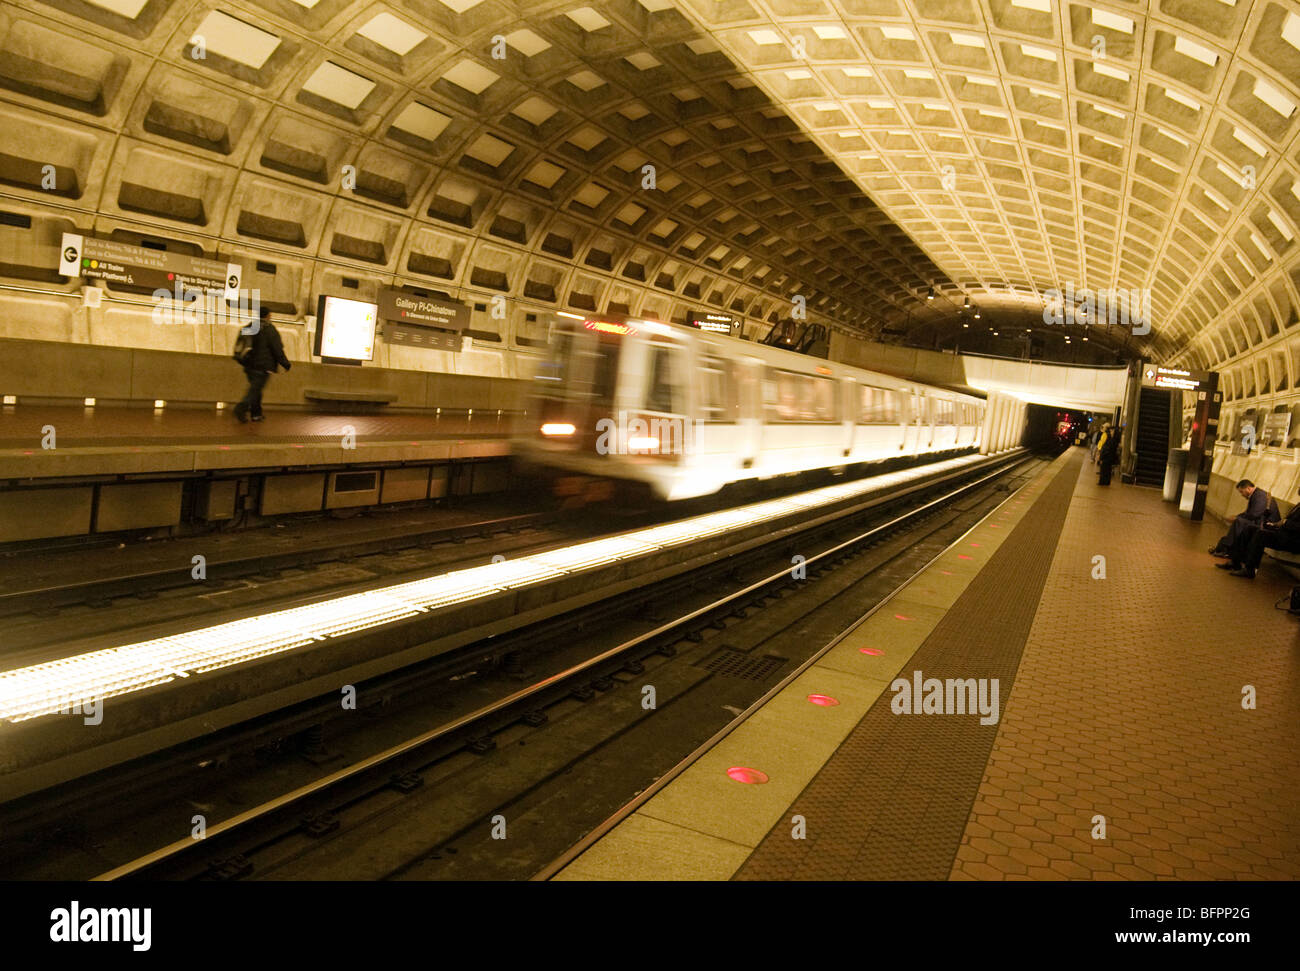 A train arriving at a station, the metrorail or metro underground rail system, Washington DC USA Stock Photo